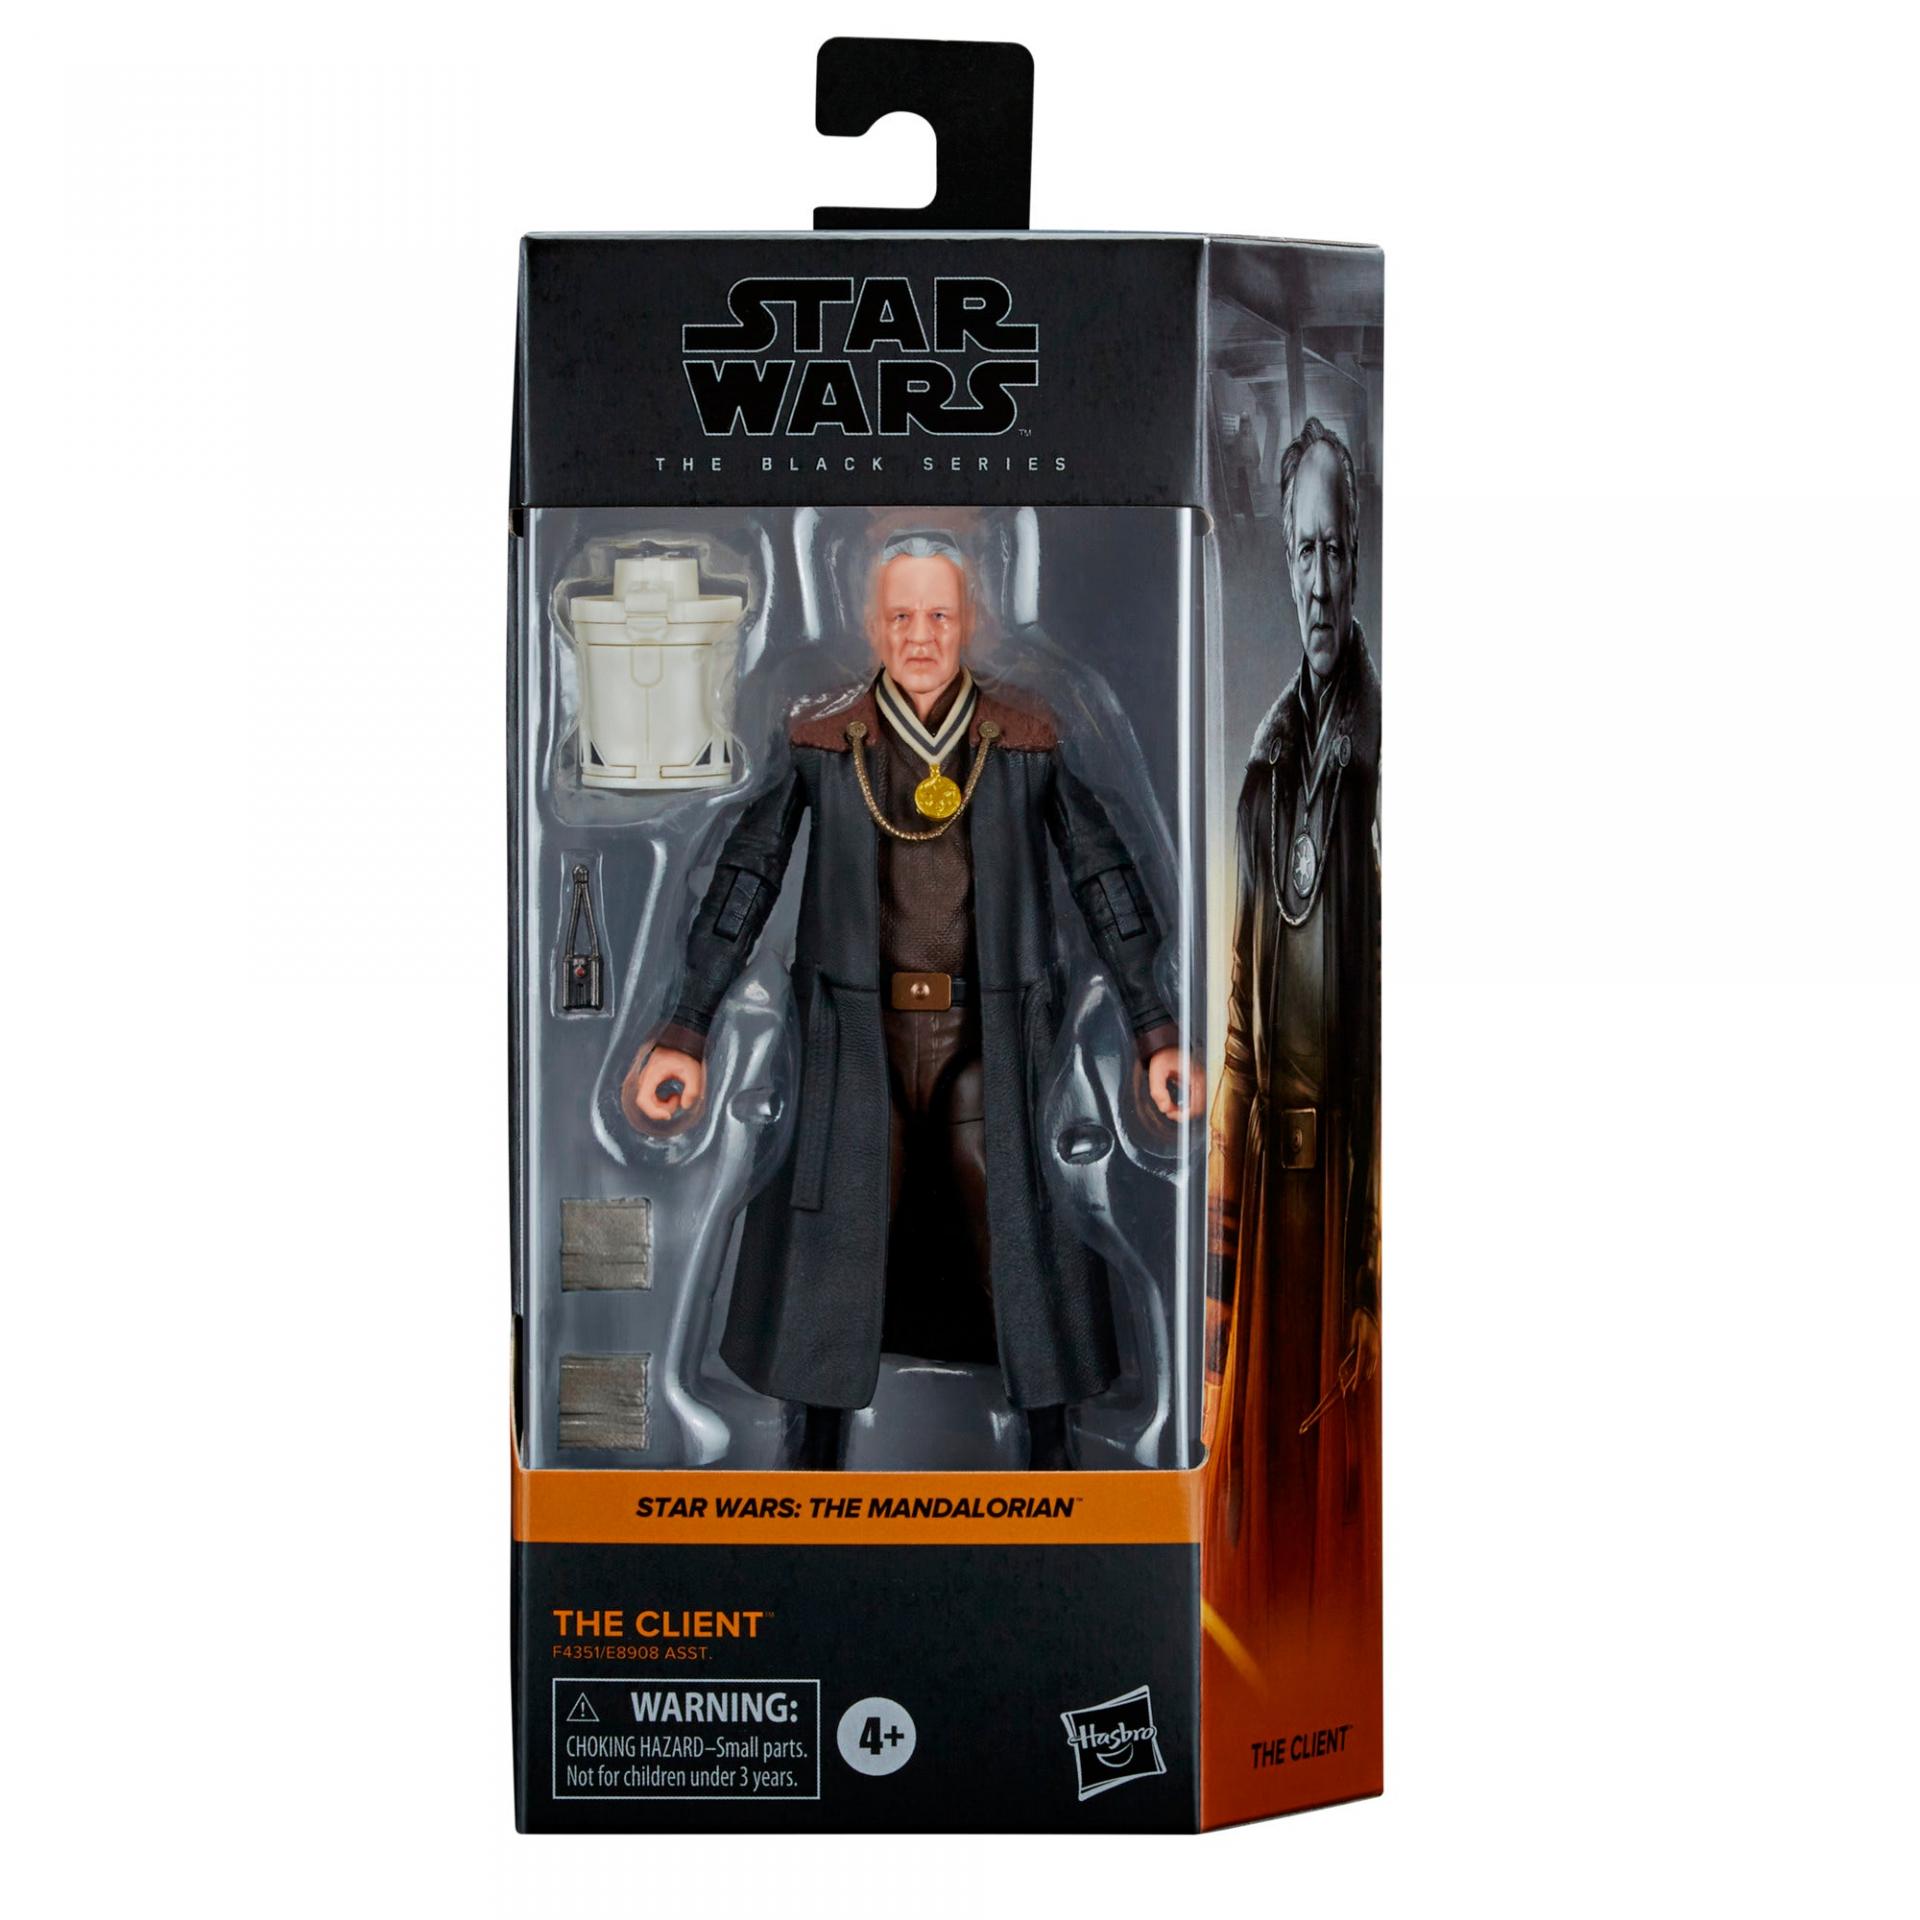 Star wars the black series the client jawascave 9